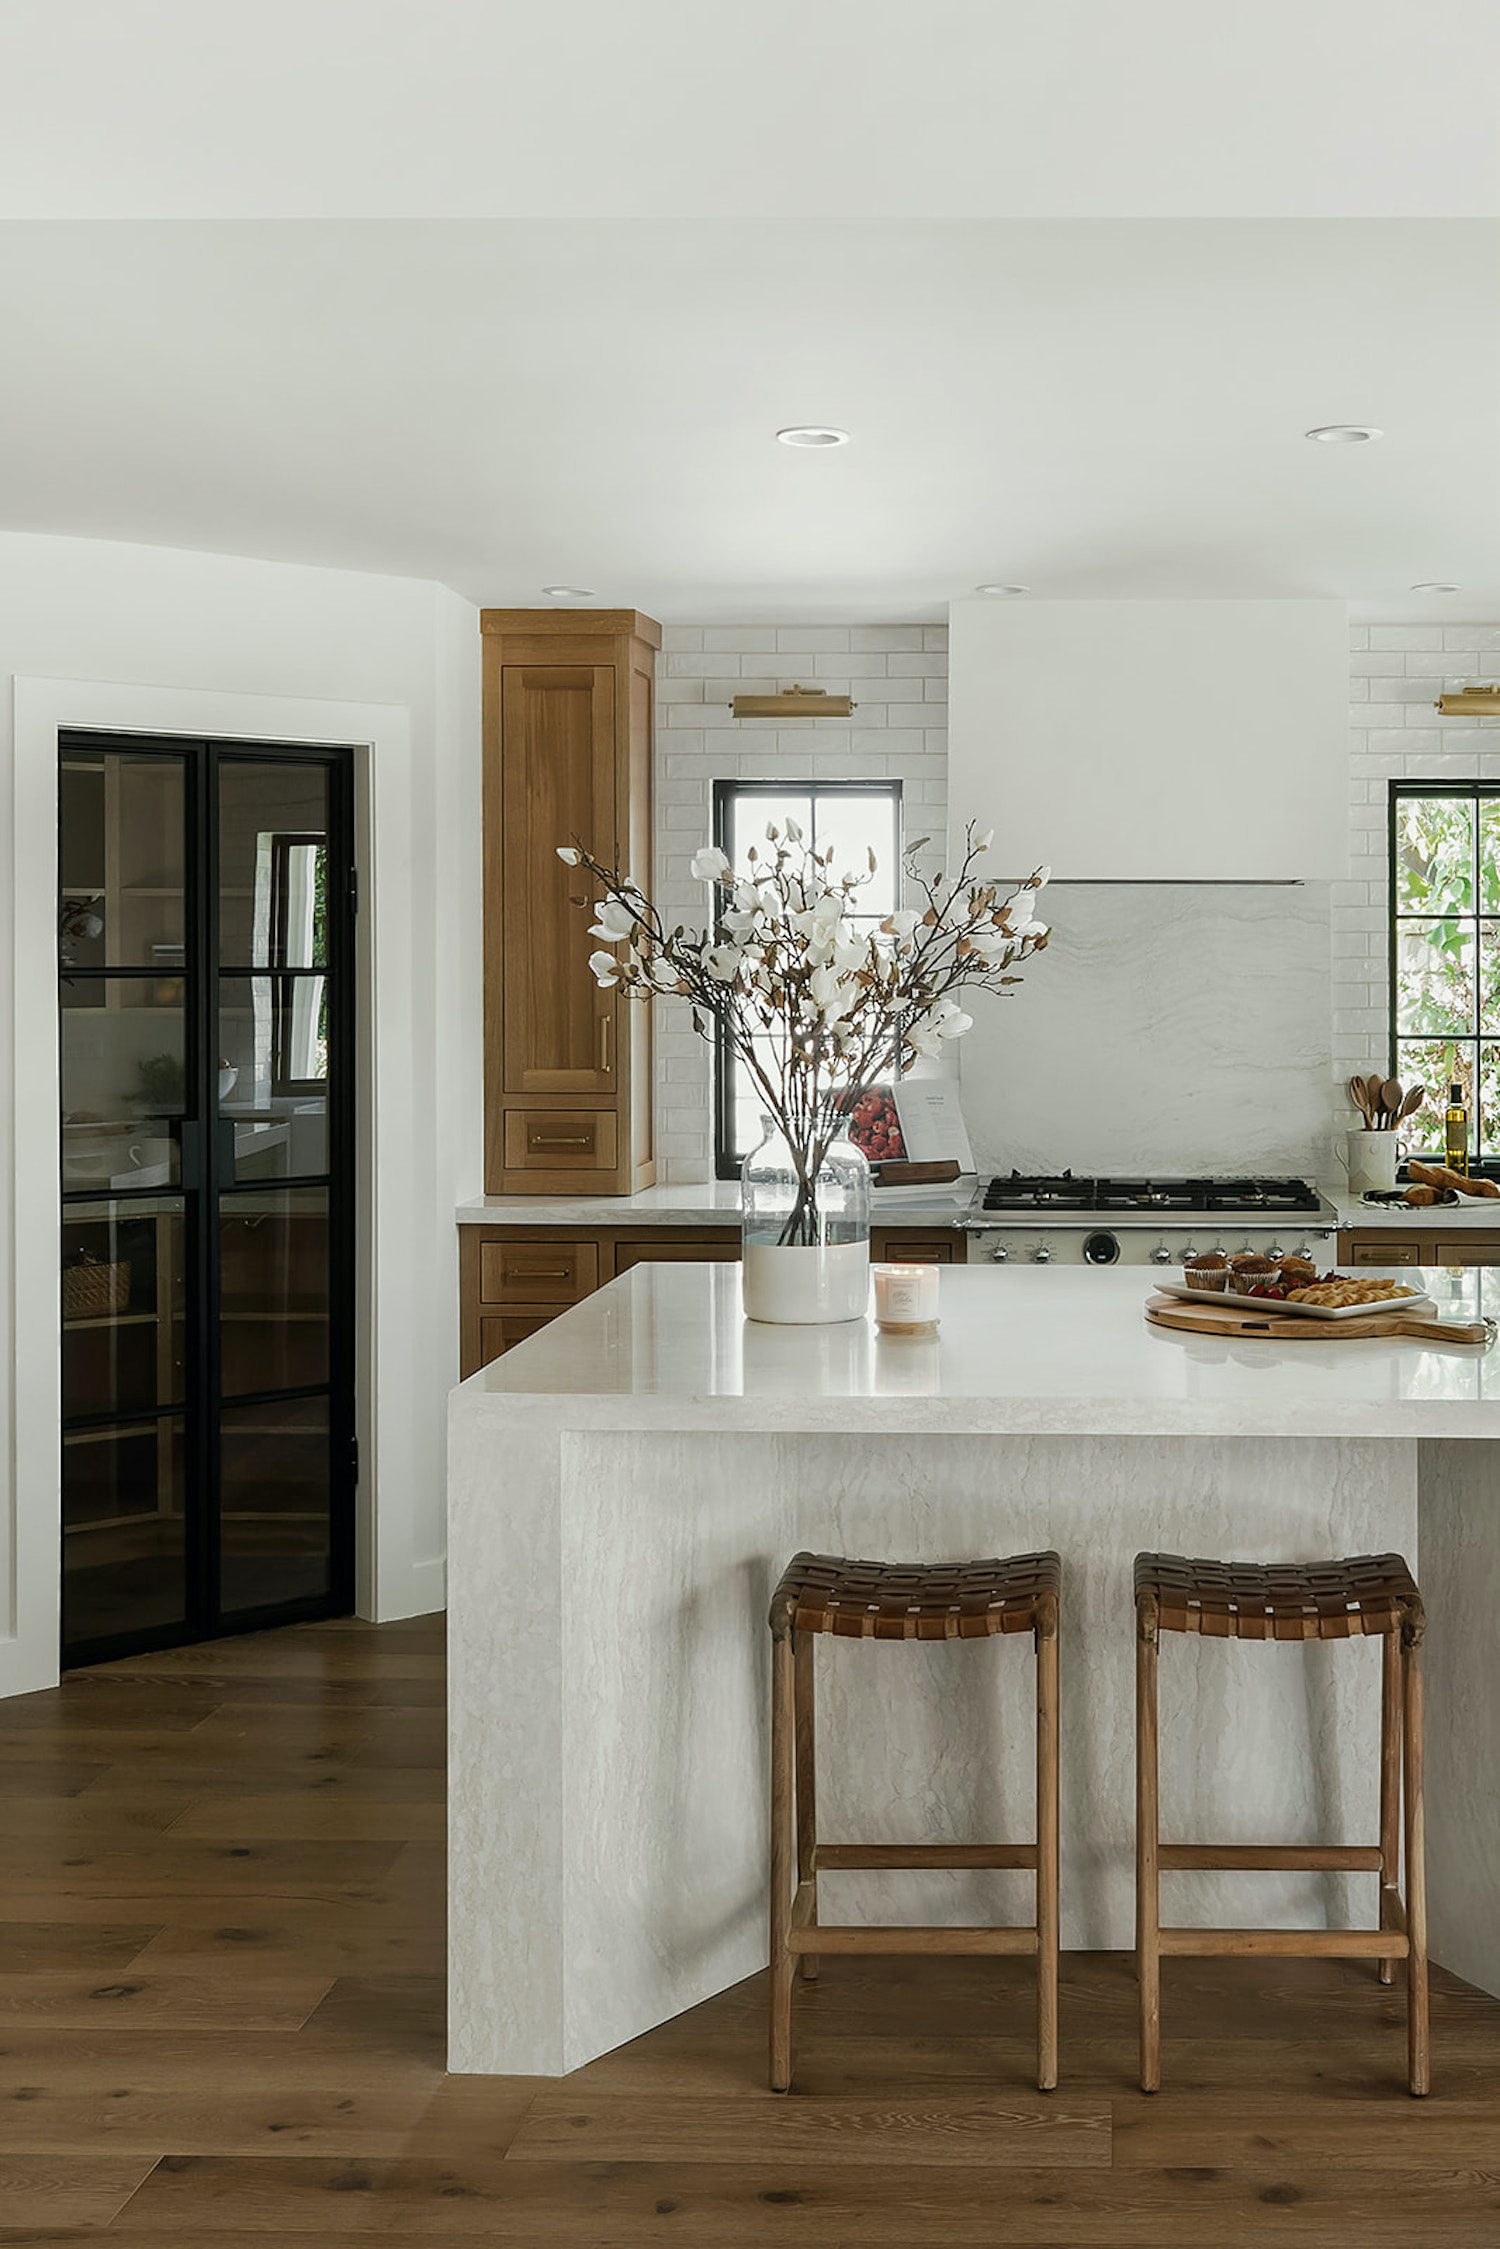 Glass Pantry Doors and Angled Waterfall Counters Spice up This Kitchen ...